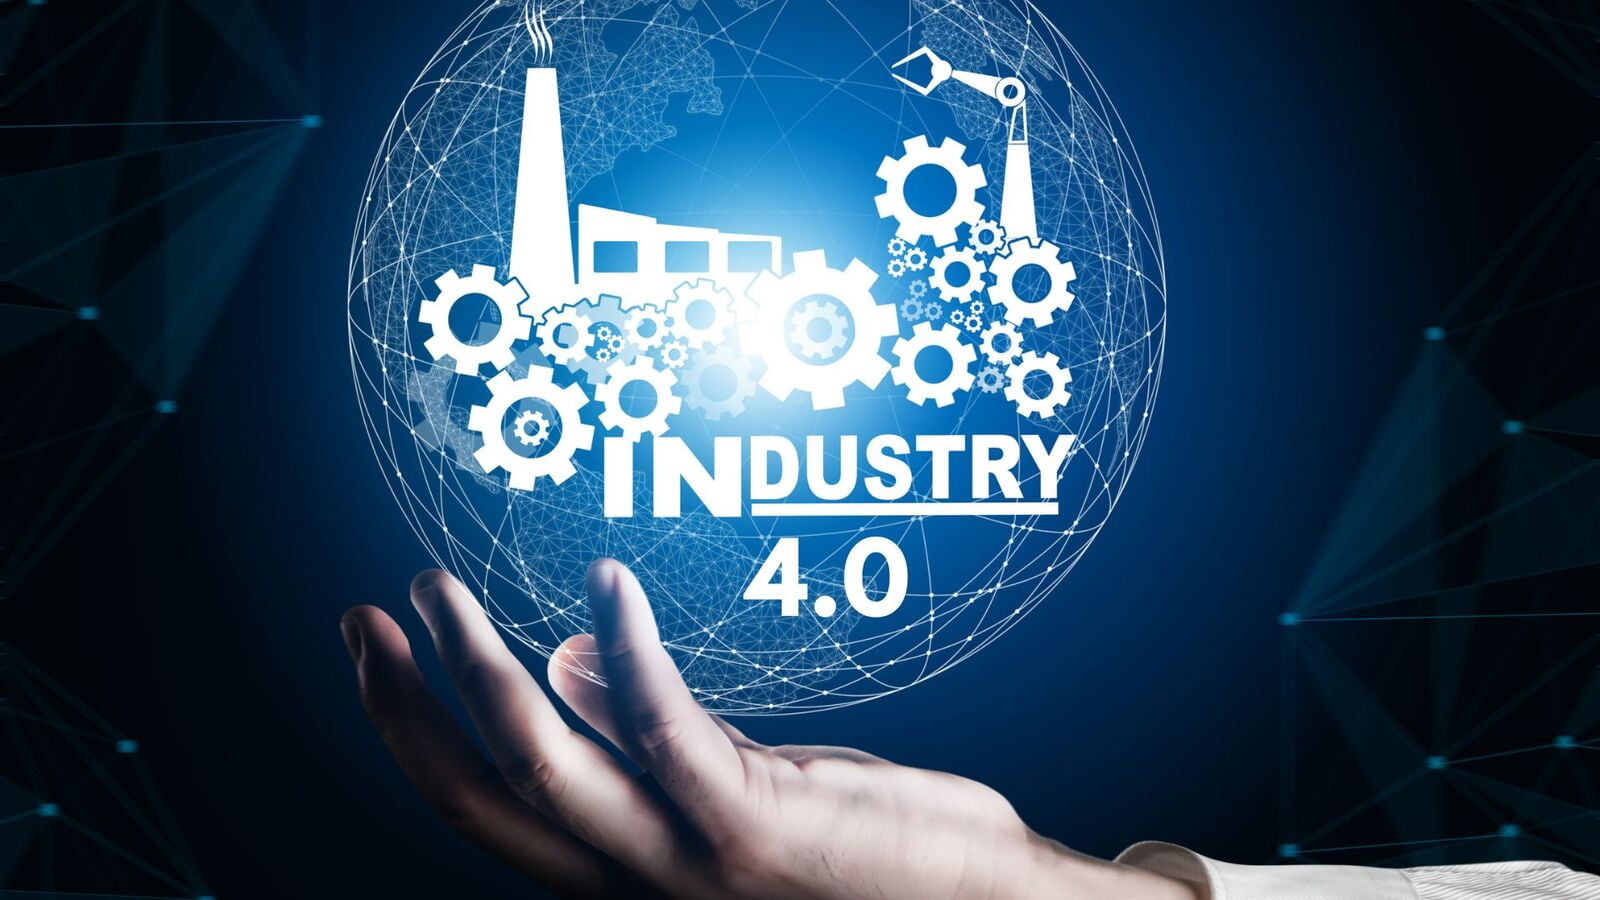 Best Industry 4.0 software you can use